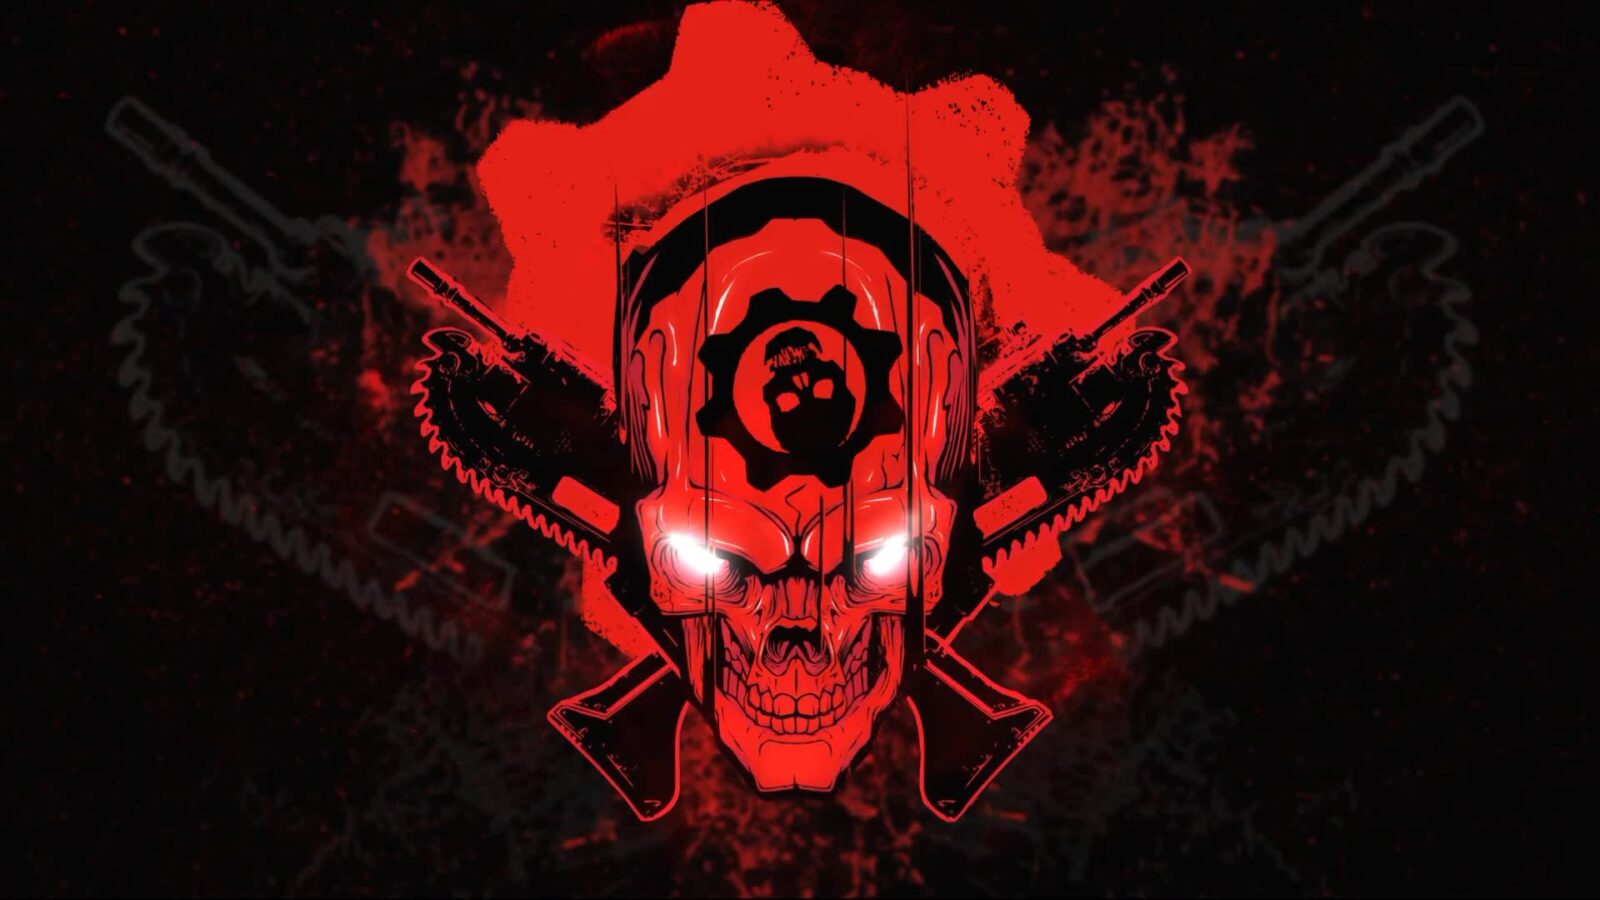 LiveWallpapers4Free.com | Gears Of War Red Skull - Game Live Wallpaper